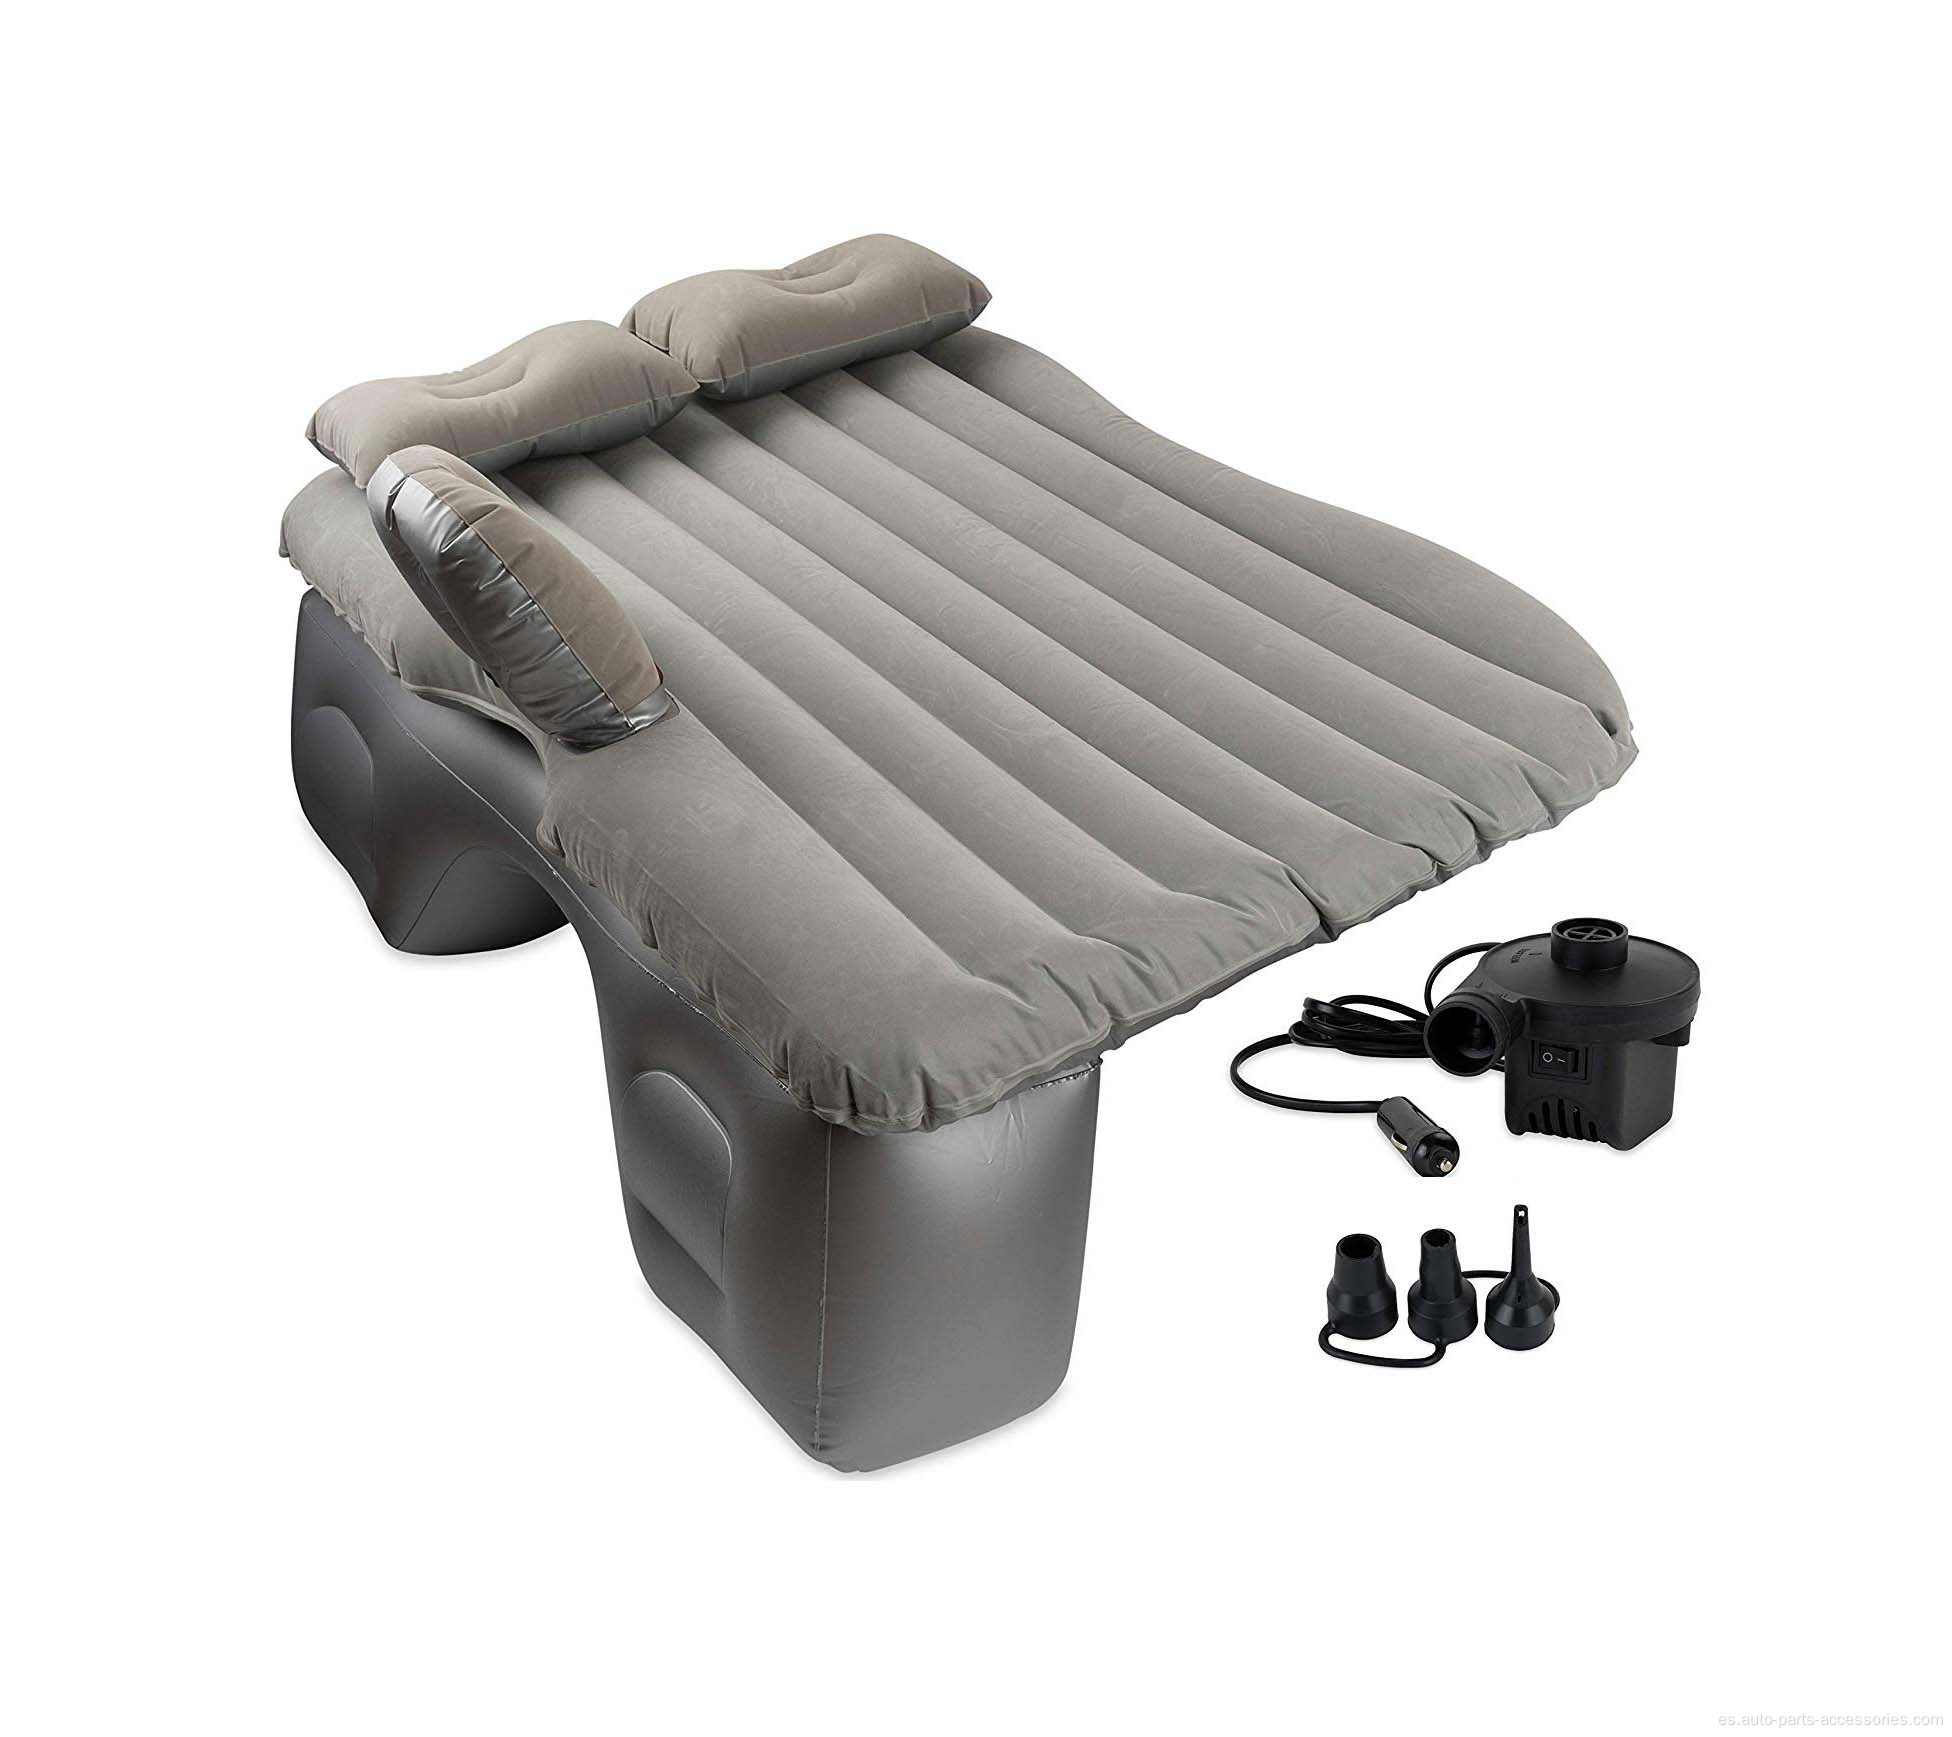 Travel Travelmattress Air Cama inflable